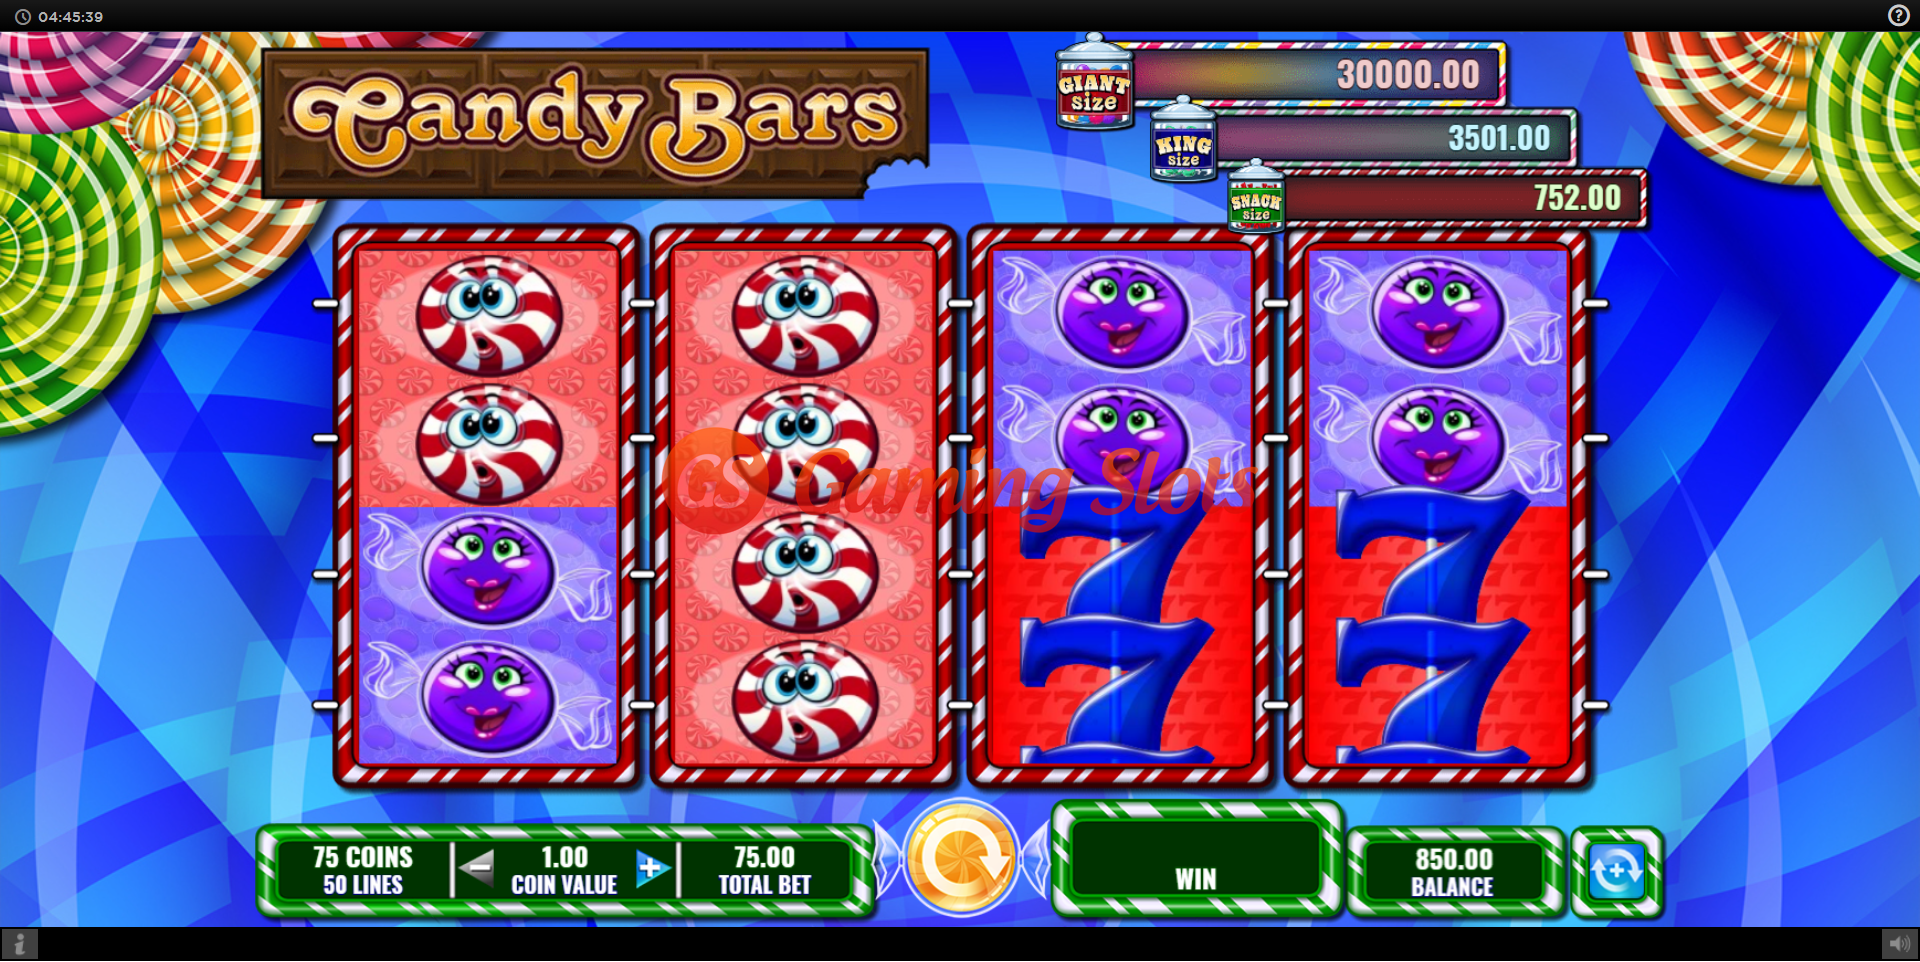 Base Game for Candy Bars slot from IGT